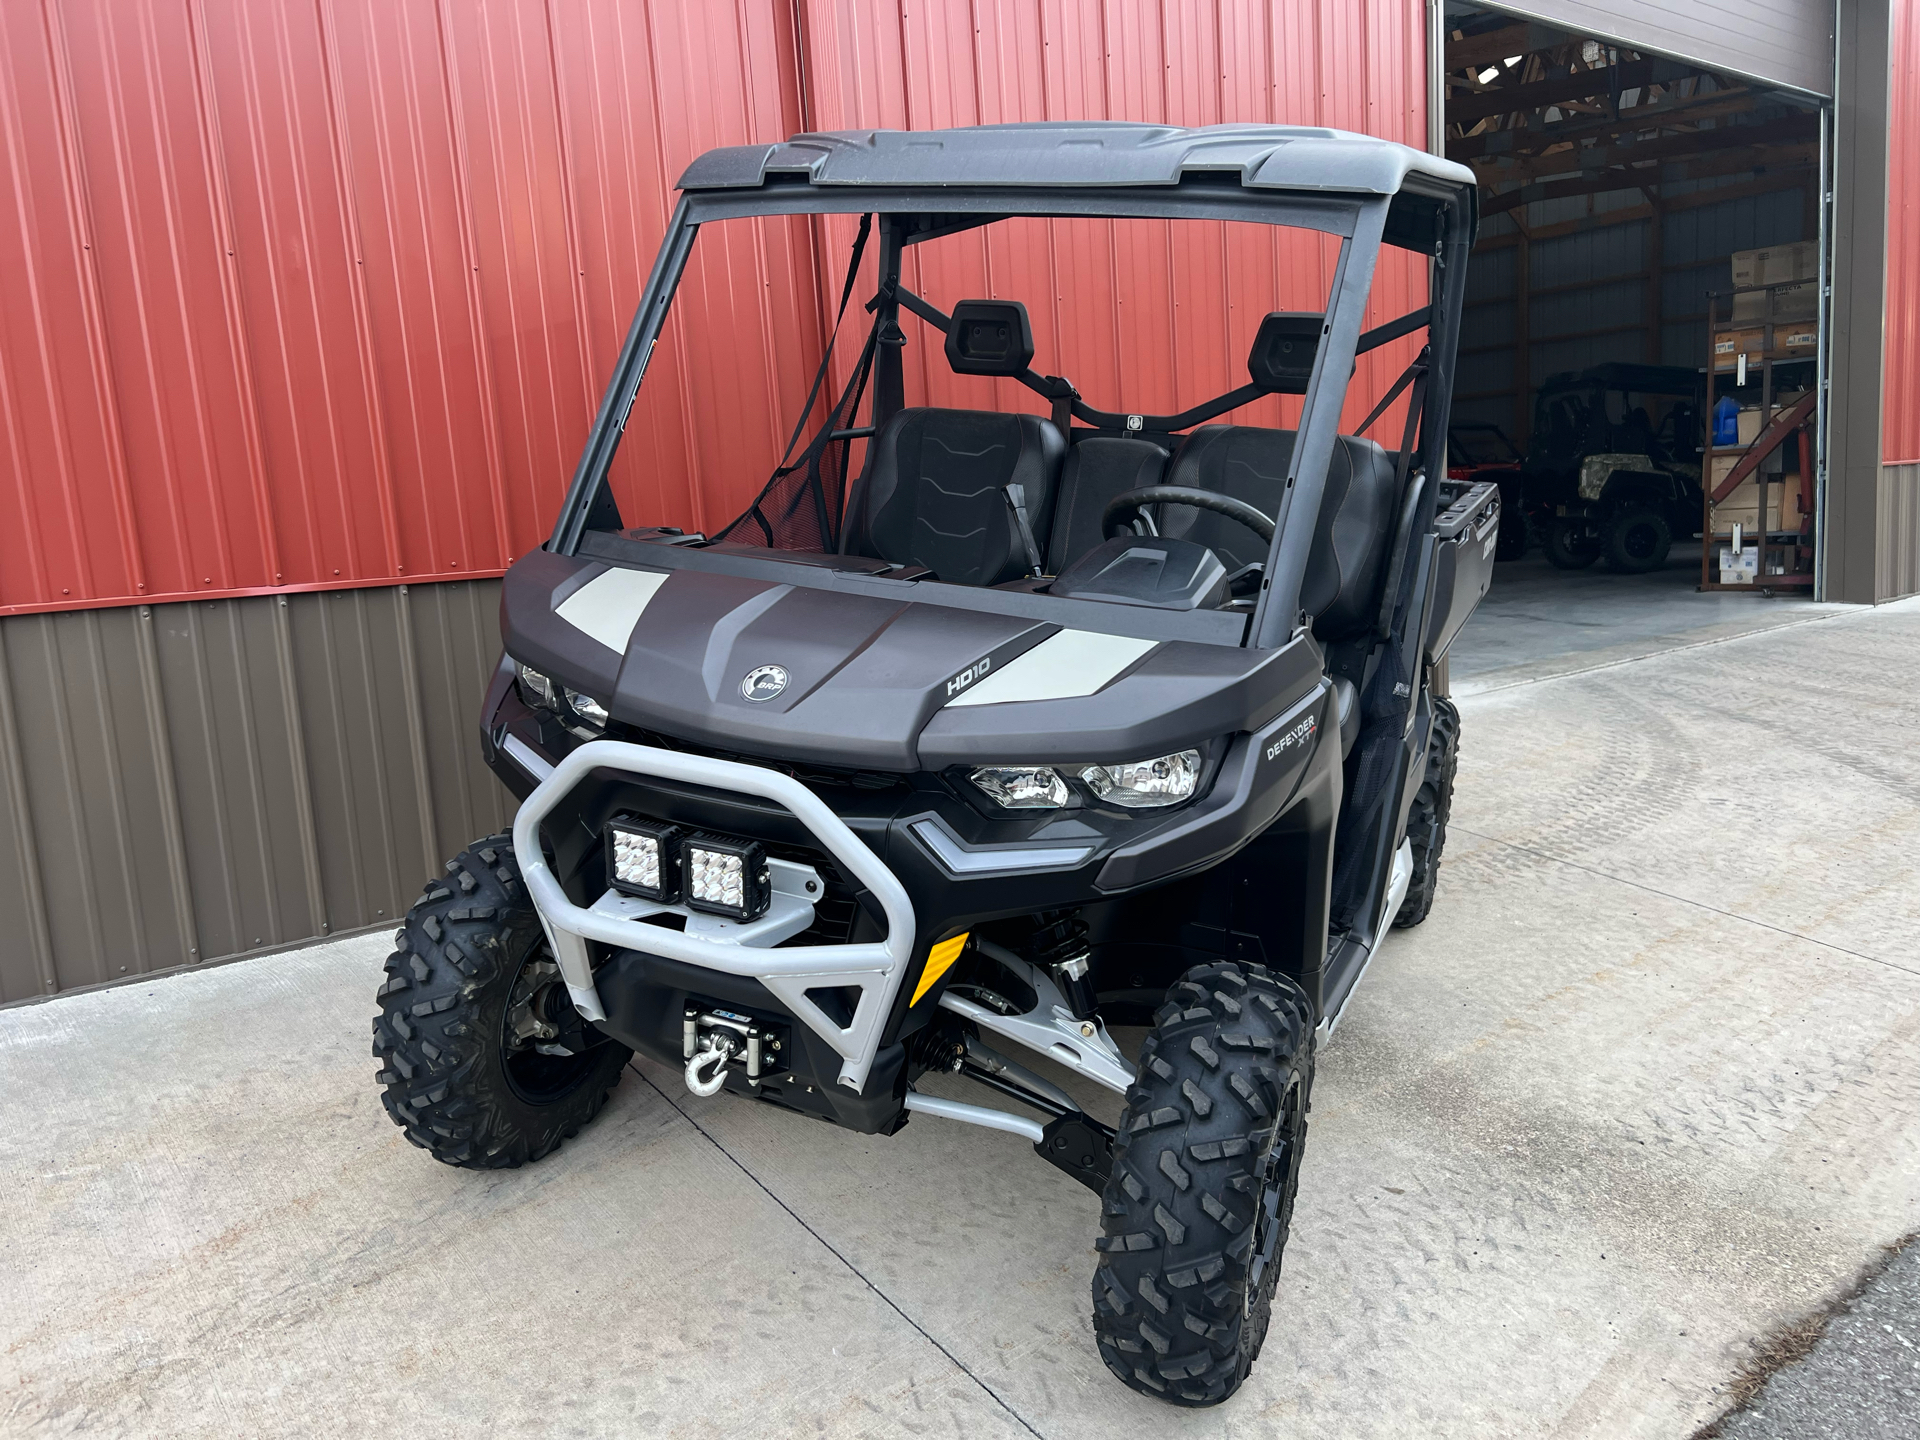 2020 Can-Am Defender XT-P HD10 in Tyrone, Pennsylvania - Photo 2